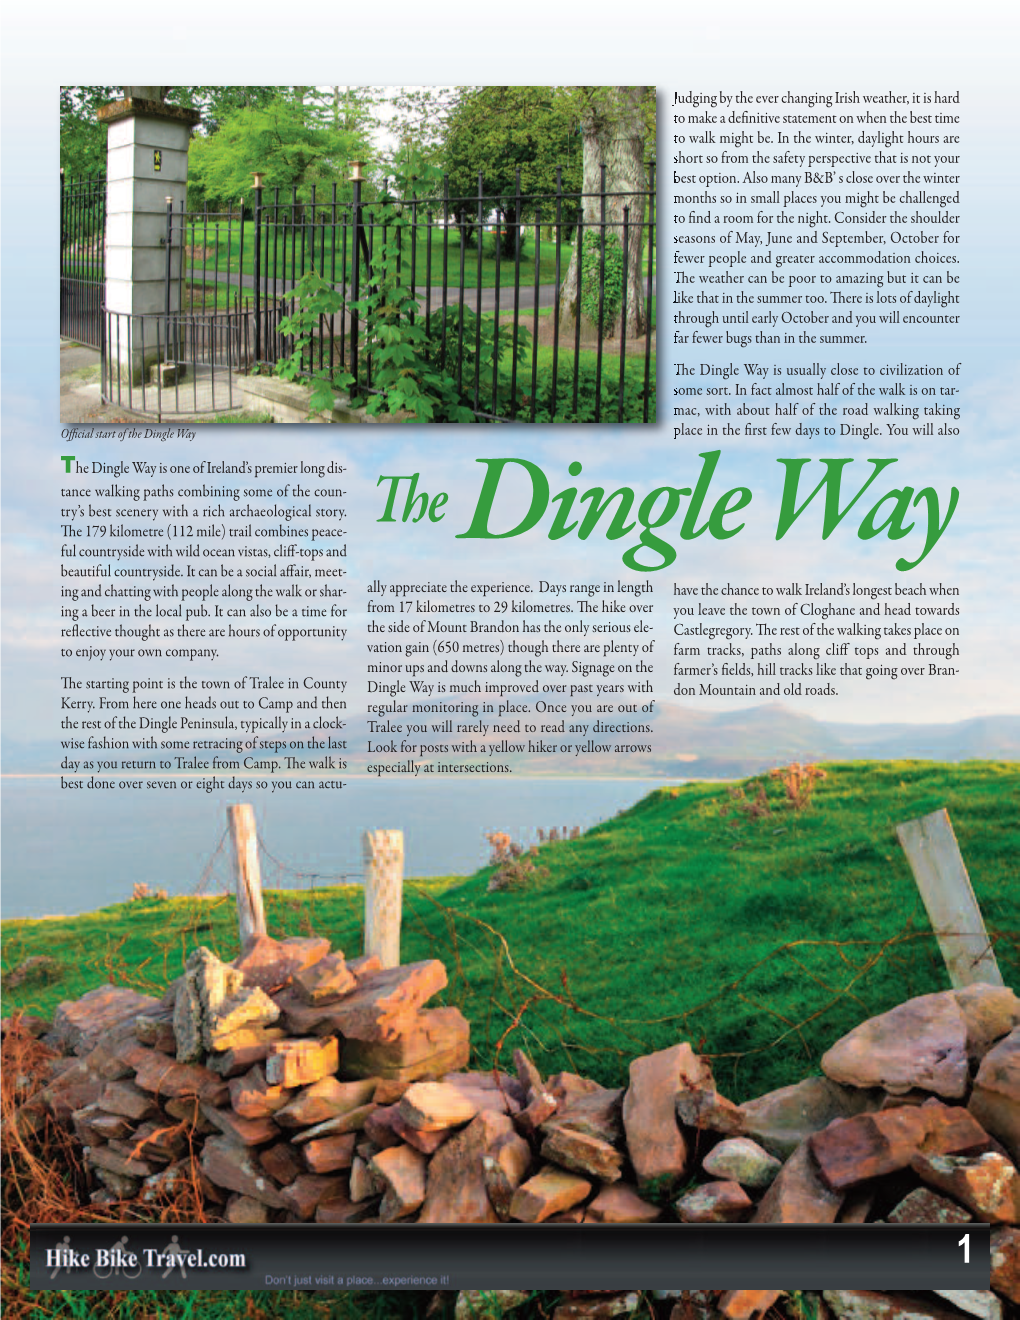 The Dingle Way Is One of Ireland's Premier Long